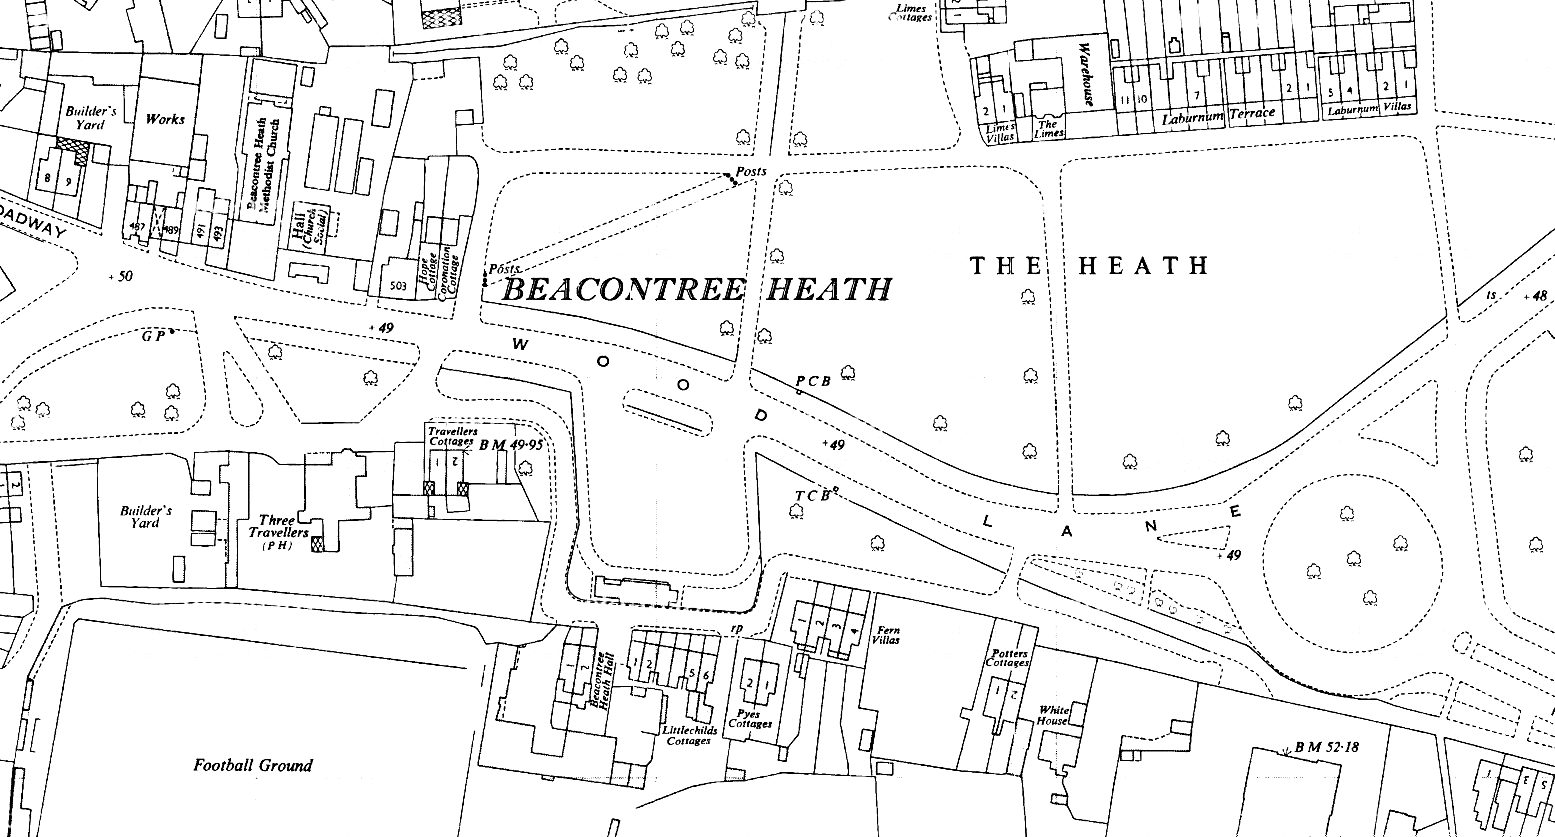 K41--Becontree Heath Box--1960 OS Map Extract 1-1250.png